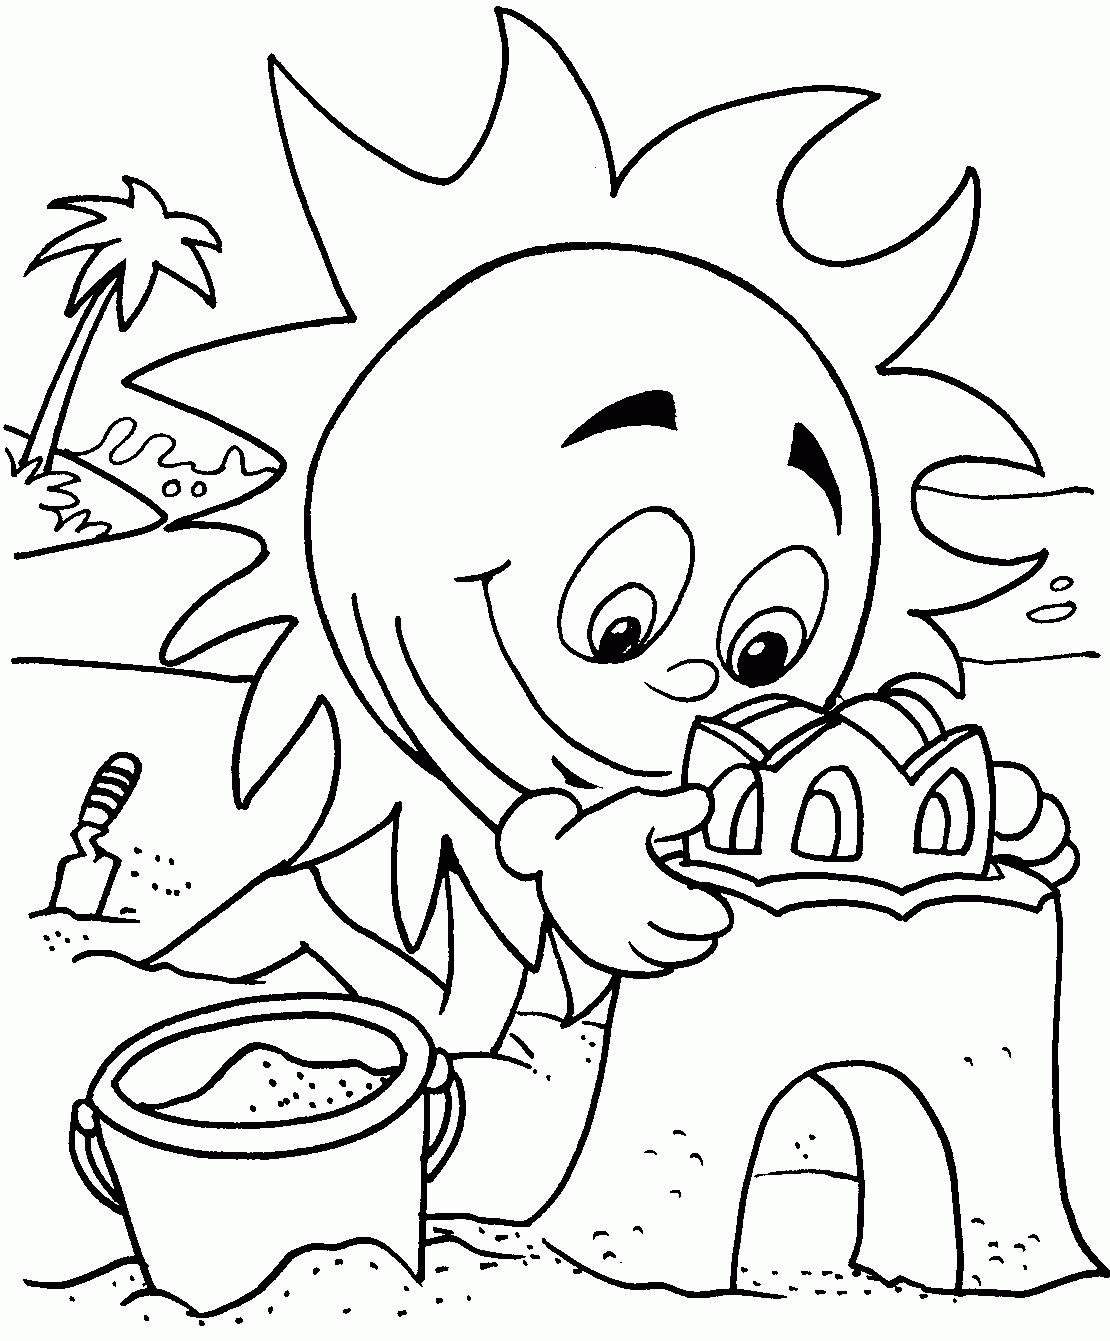 Summer Themed Coloring Page - Coloring Home